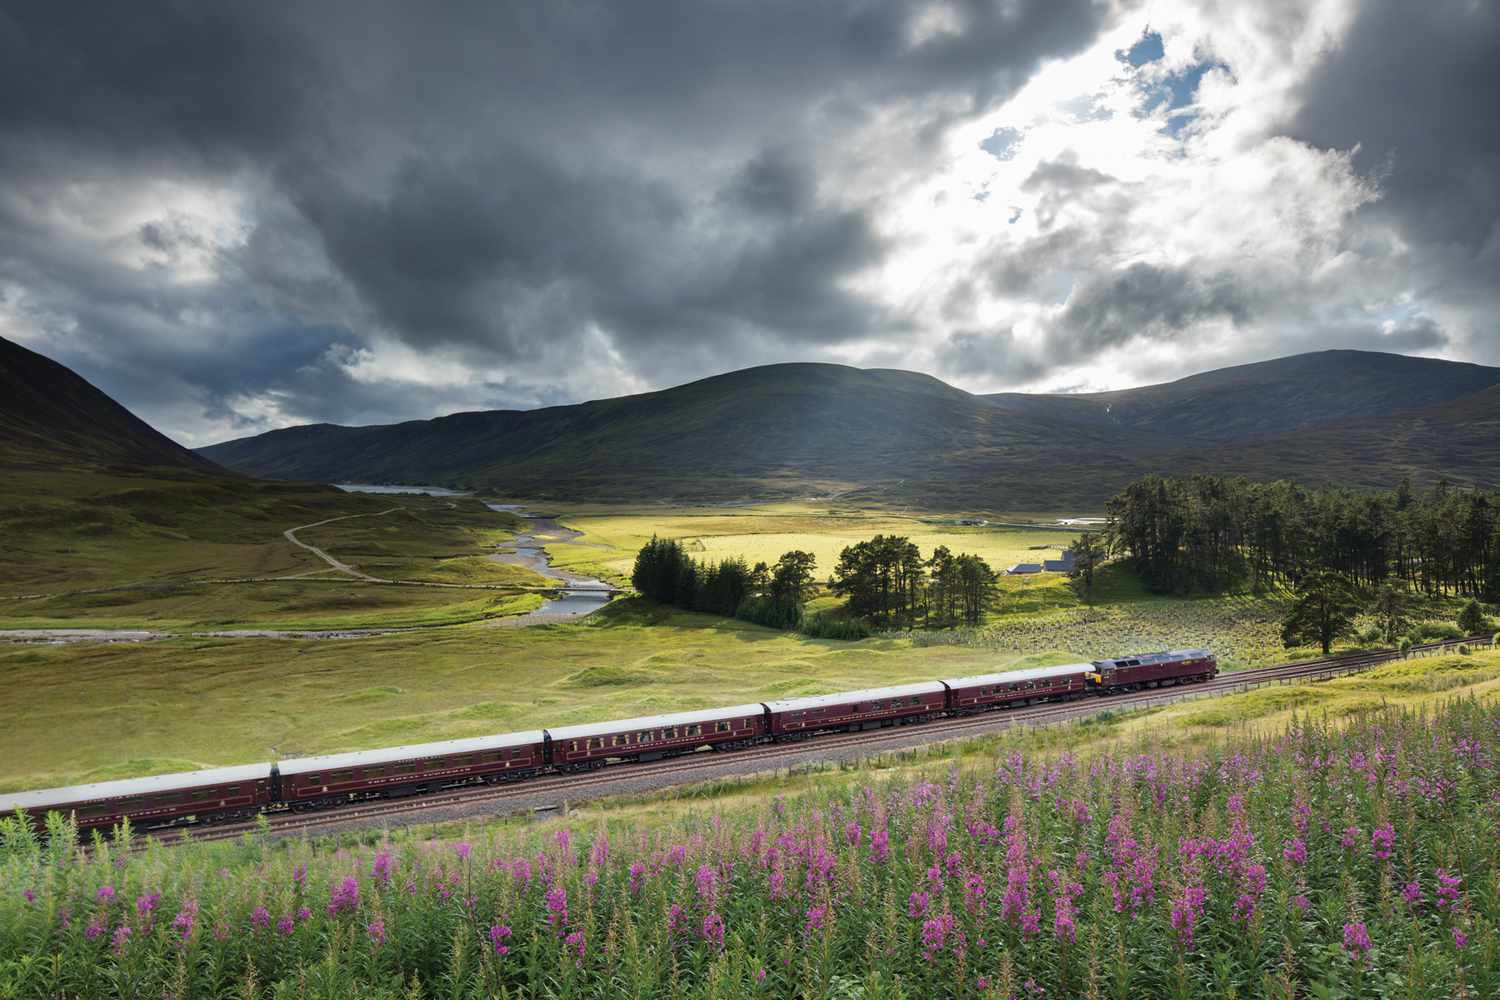 This Luxurious Train Journey Through Scotland Comes With an Onboard Spa, Whisky Tastings, and Castle Tours